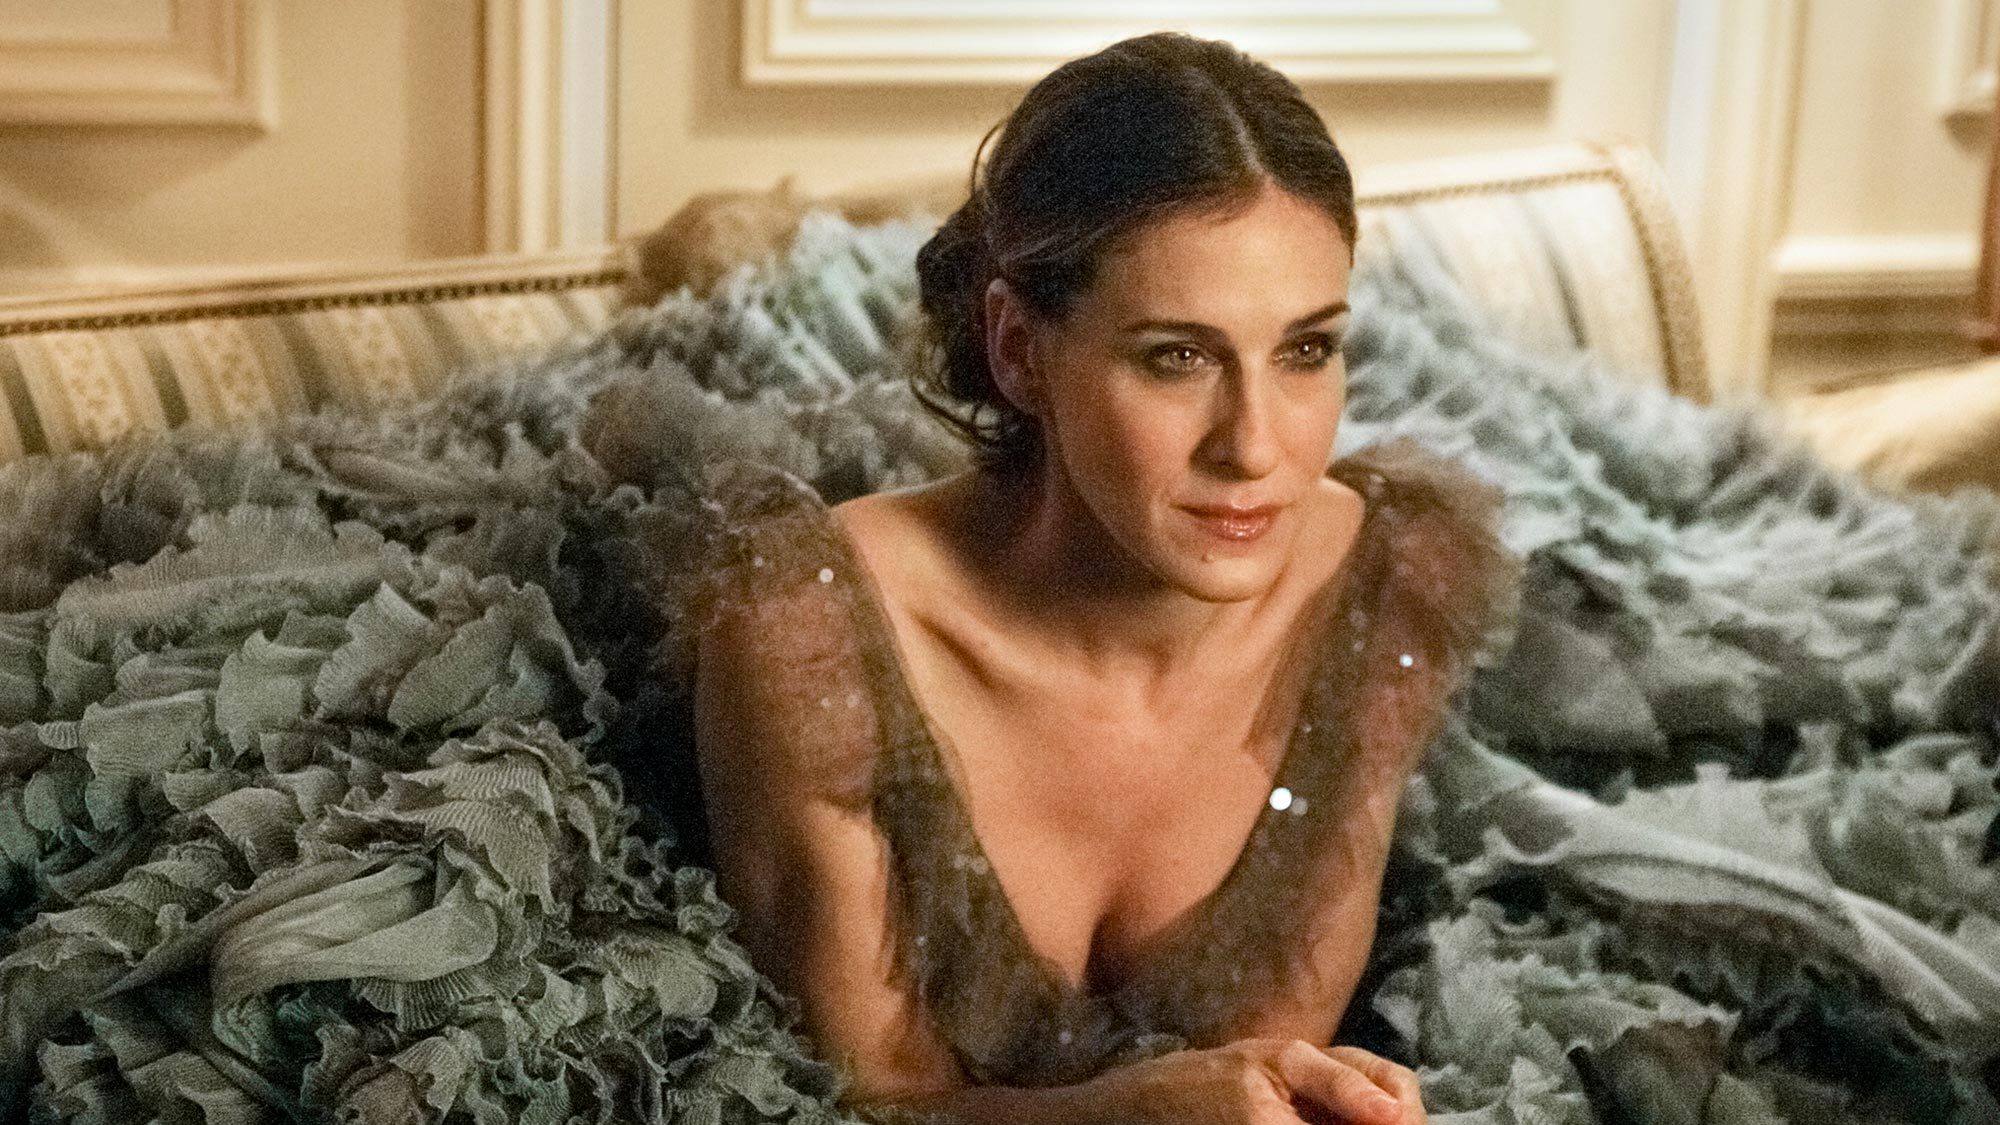 Now's Your Chance To Buy Carrie Bradshaw's Iconic Outfit